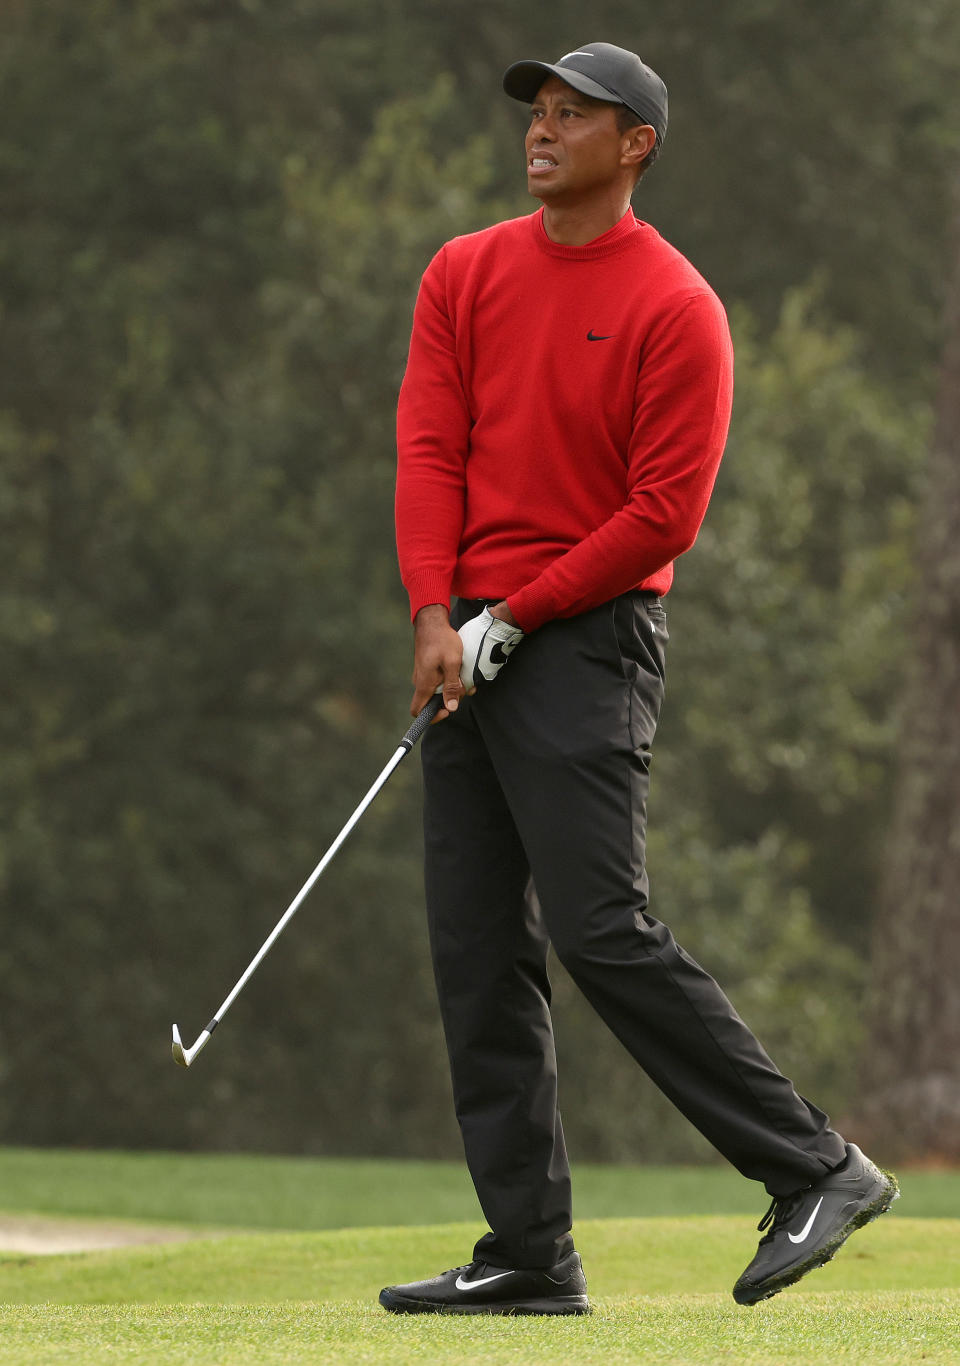 tiger woods masters 2020, nike shoes, nike golf shoes, tiger woods nike, tiger woods, masters tournament 